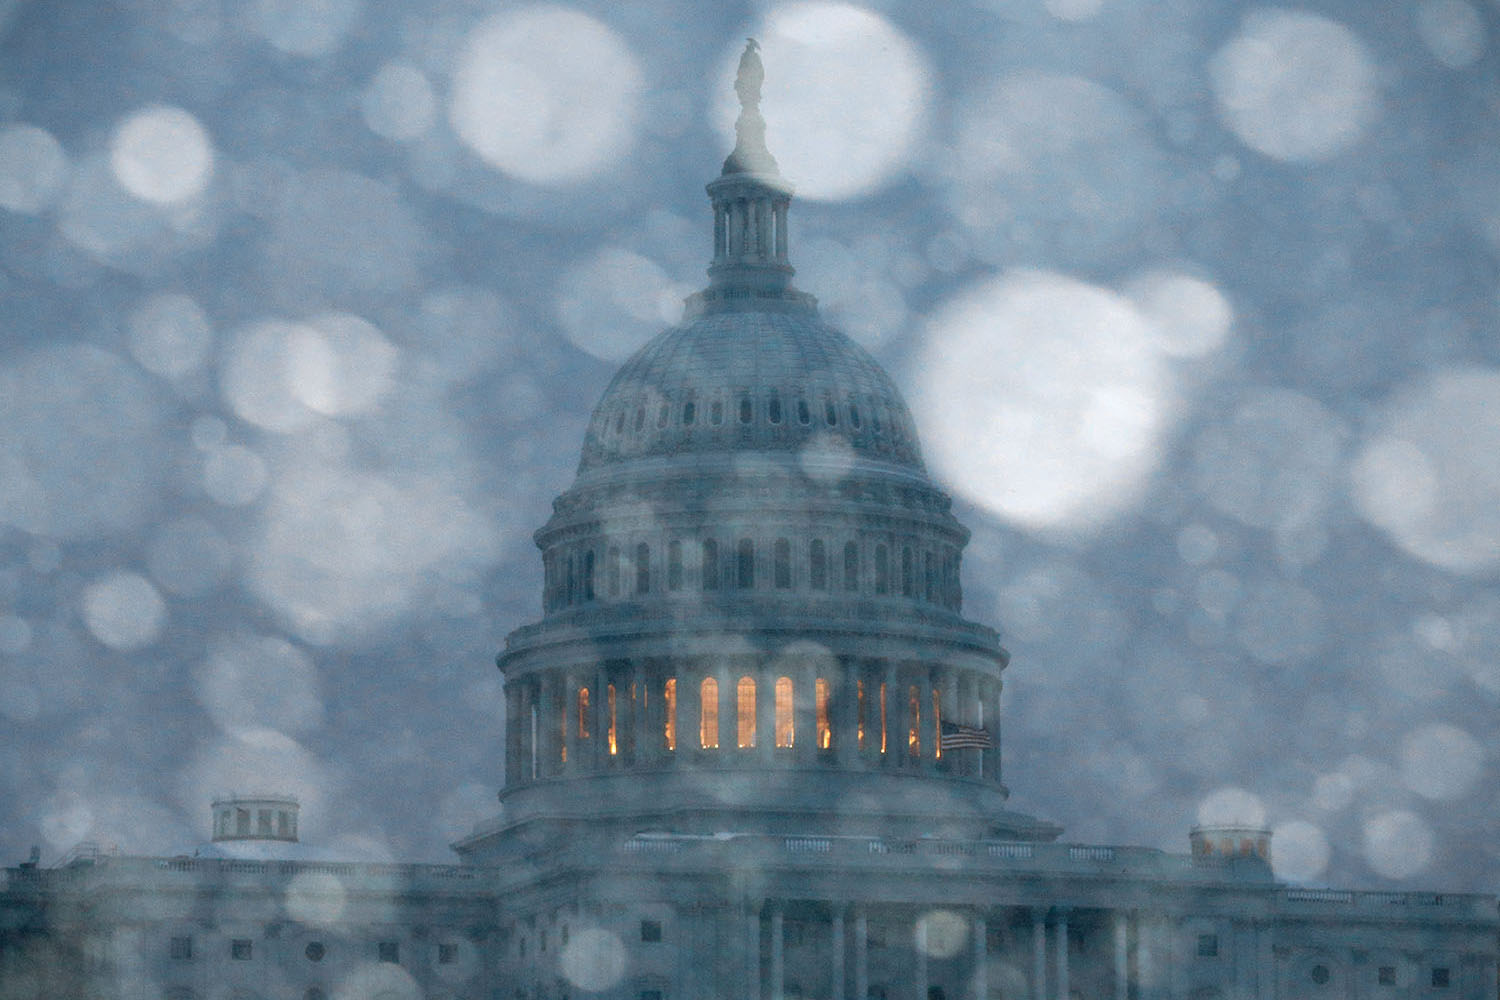 Winter Storm Brings More Snow To DC Area